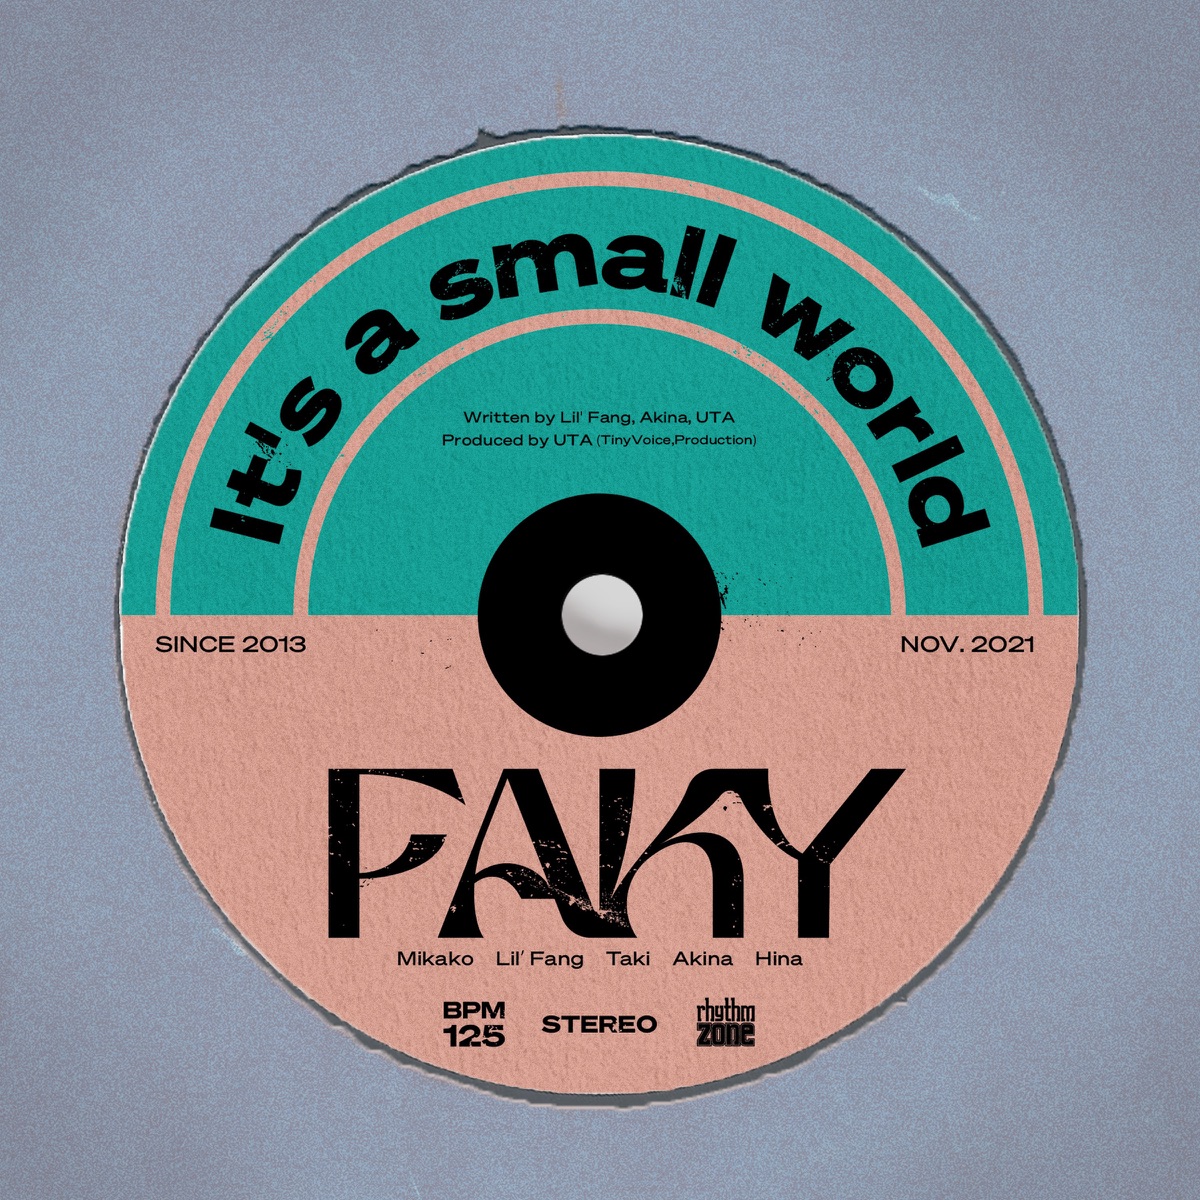 Cover art for『FAKY - It's a small world』from the release『It's a small world